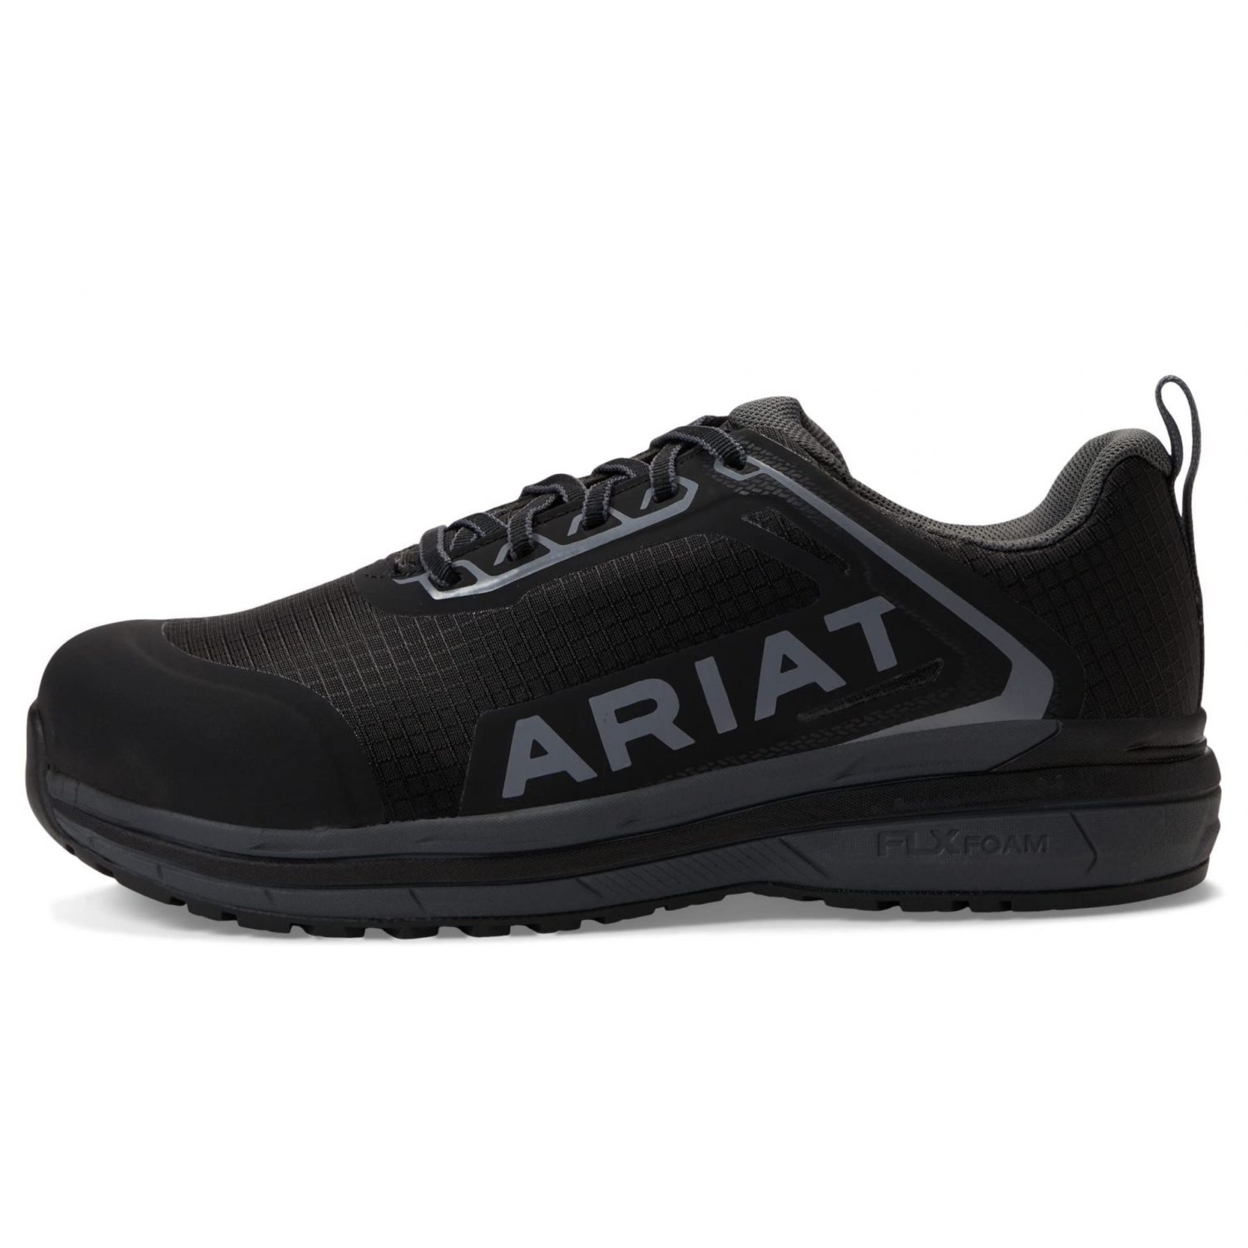 ARIAT Women's Outpace Composite Toe Safety Shoe Fire ONE SIZE BLACK - BLACK, 10.5